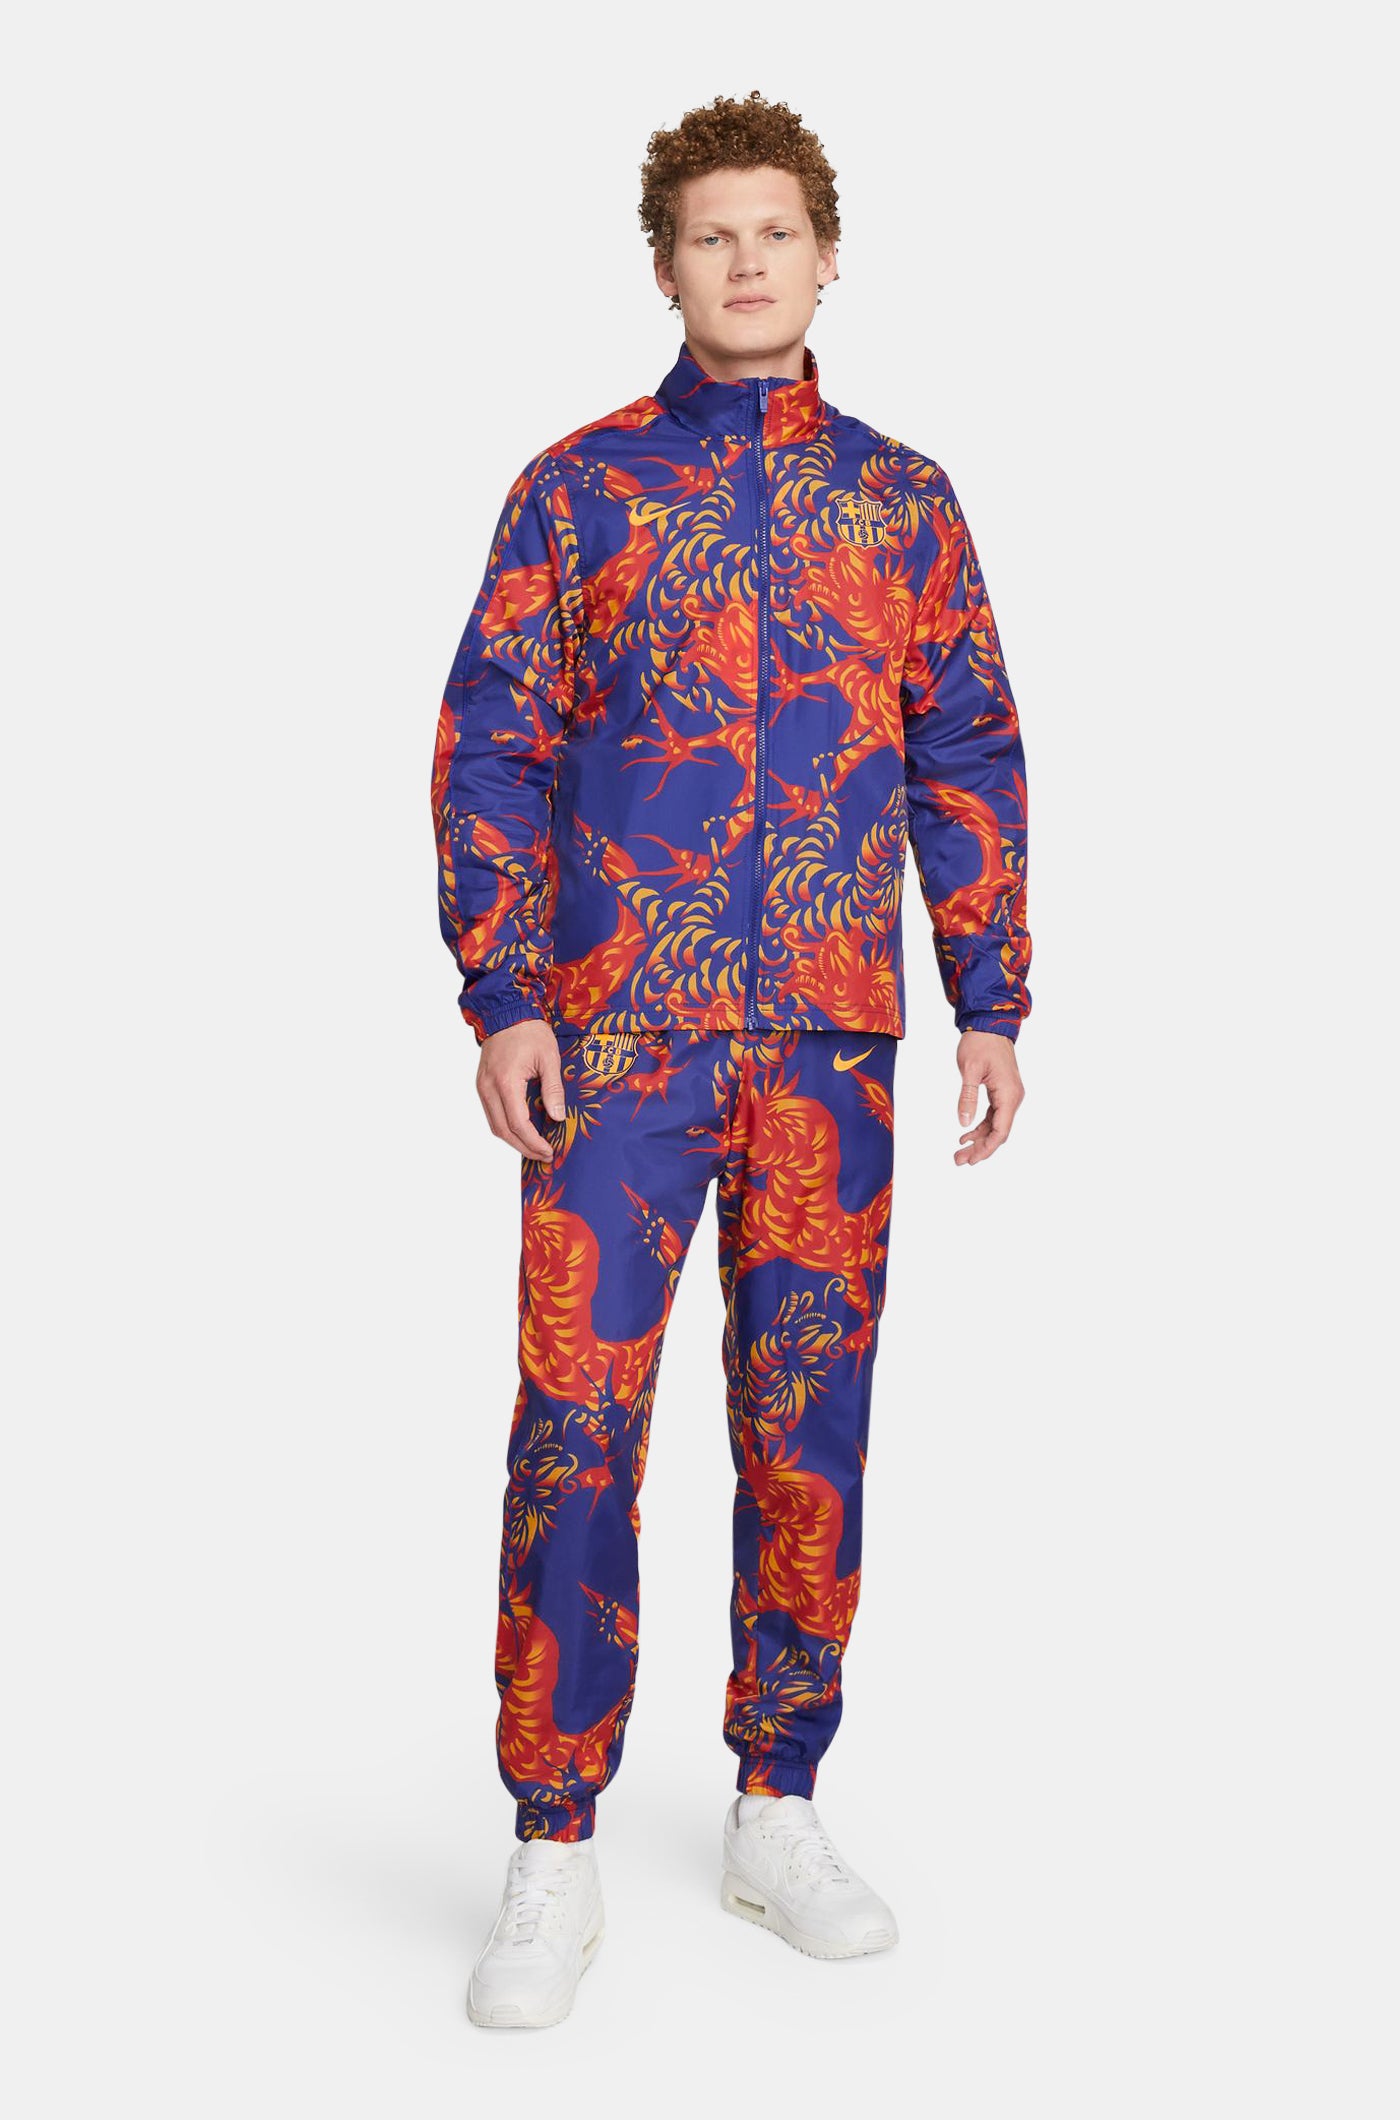 FC Barcelona Tracksuit new year's chinese print 23/24 – Barça Official ...